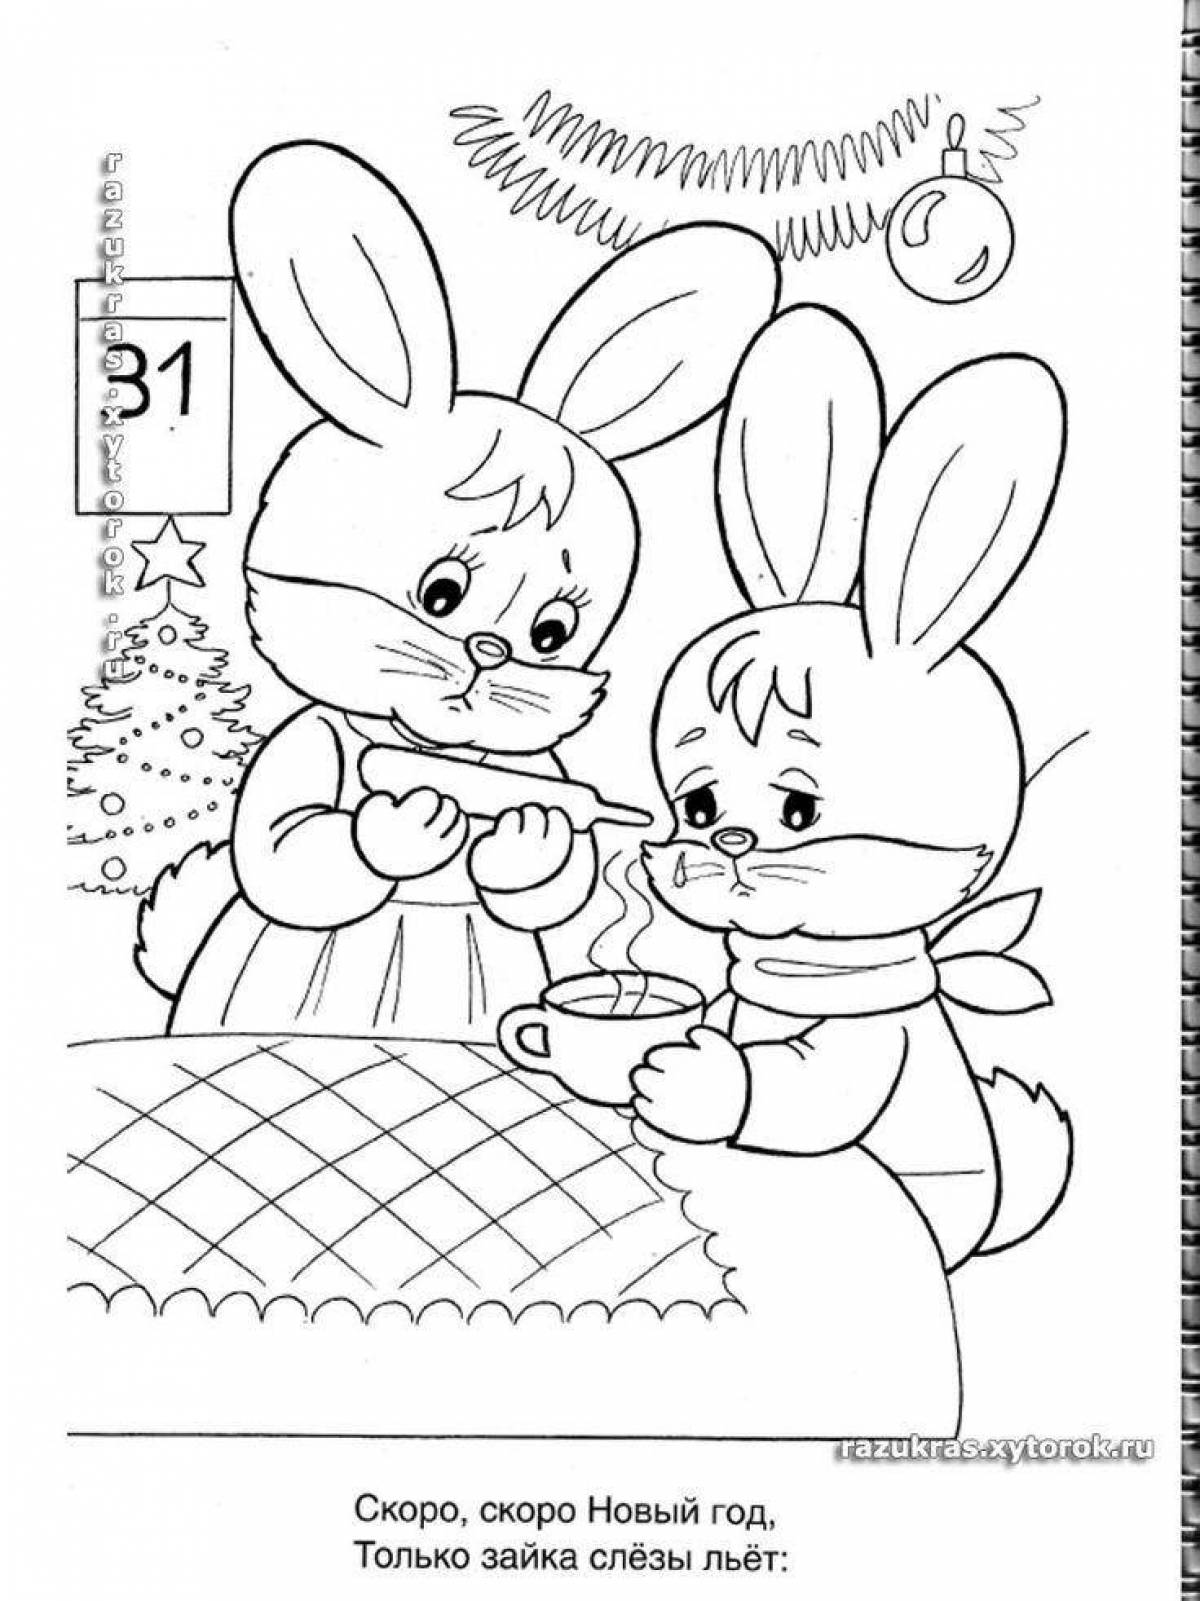 Amazing new year bunny coloring book